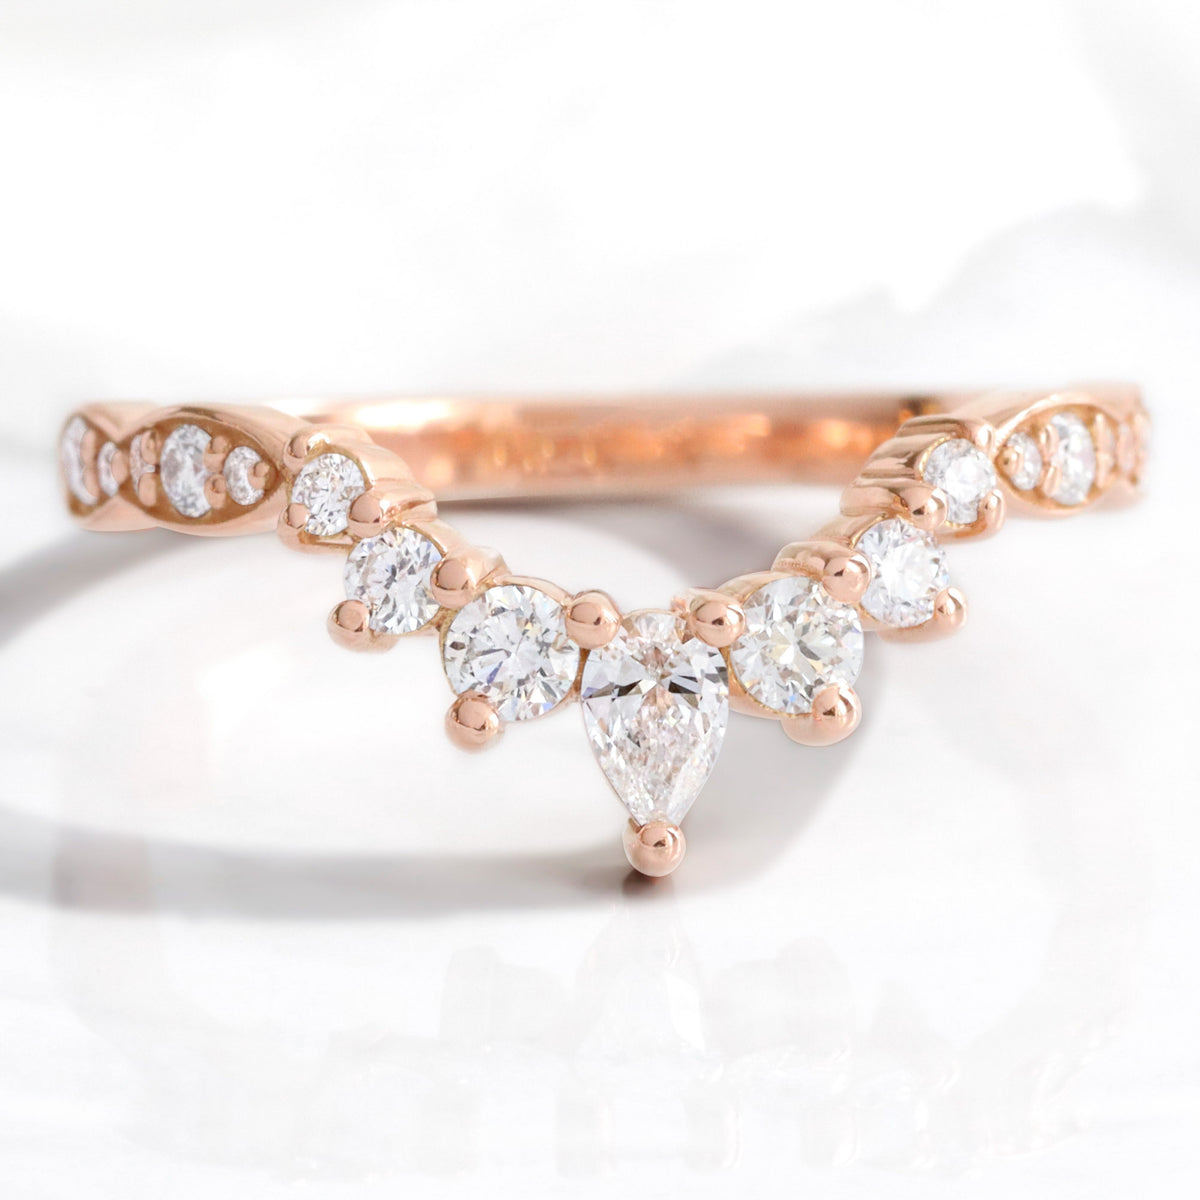 Pear and round diamond wedding ring rose gold u shaped curved scalloped wedding band la more design jewelry